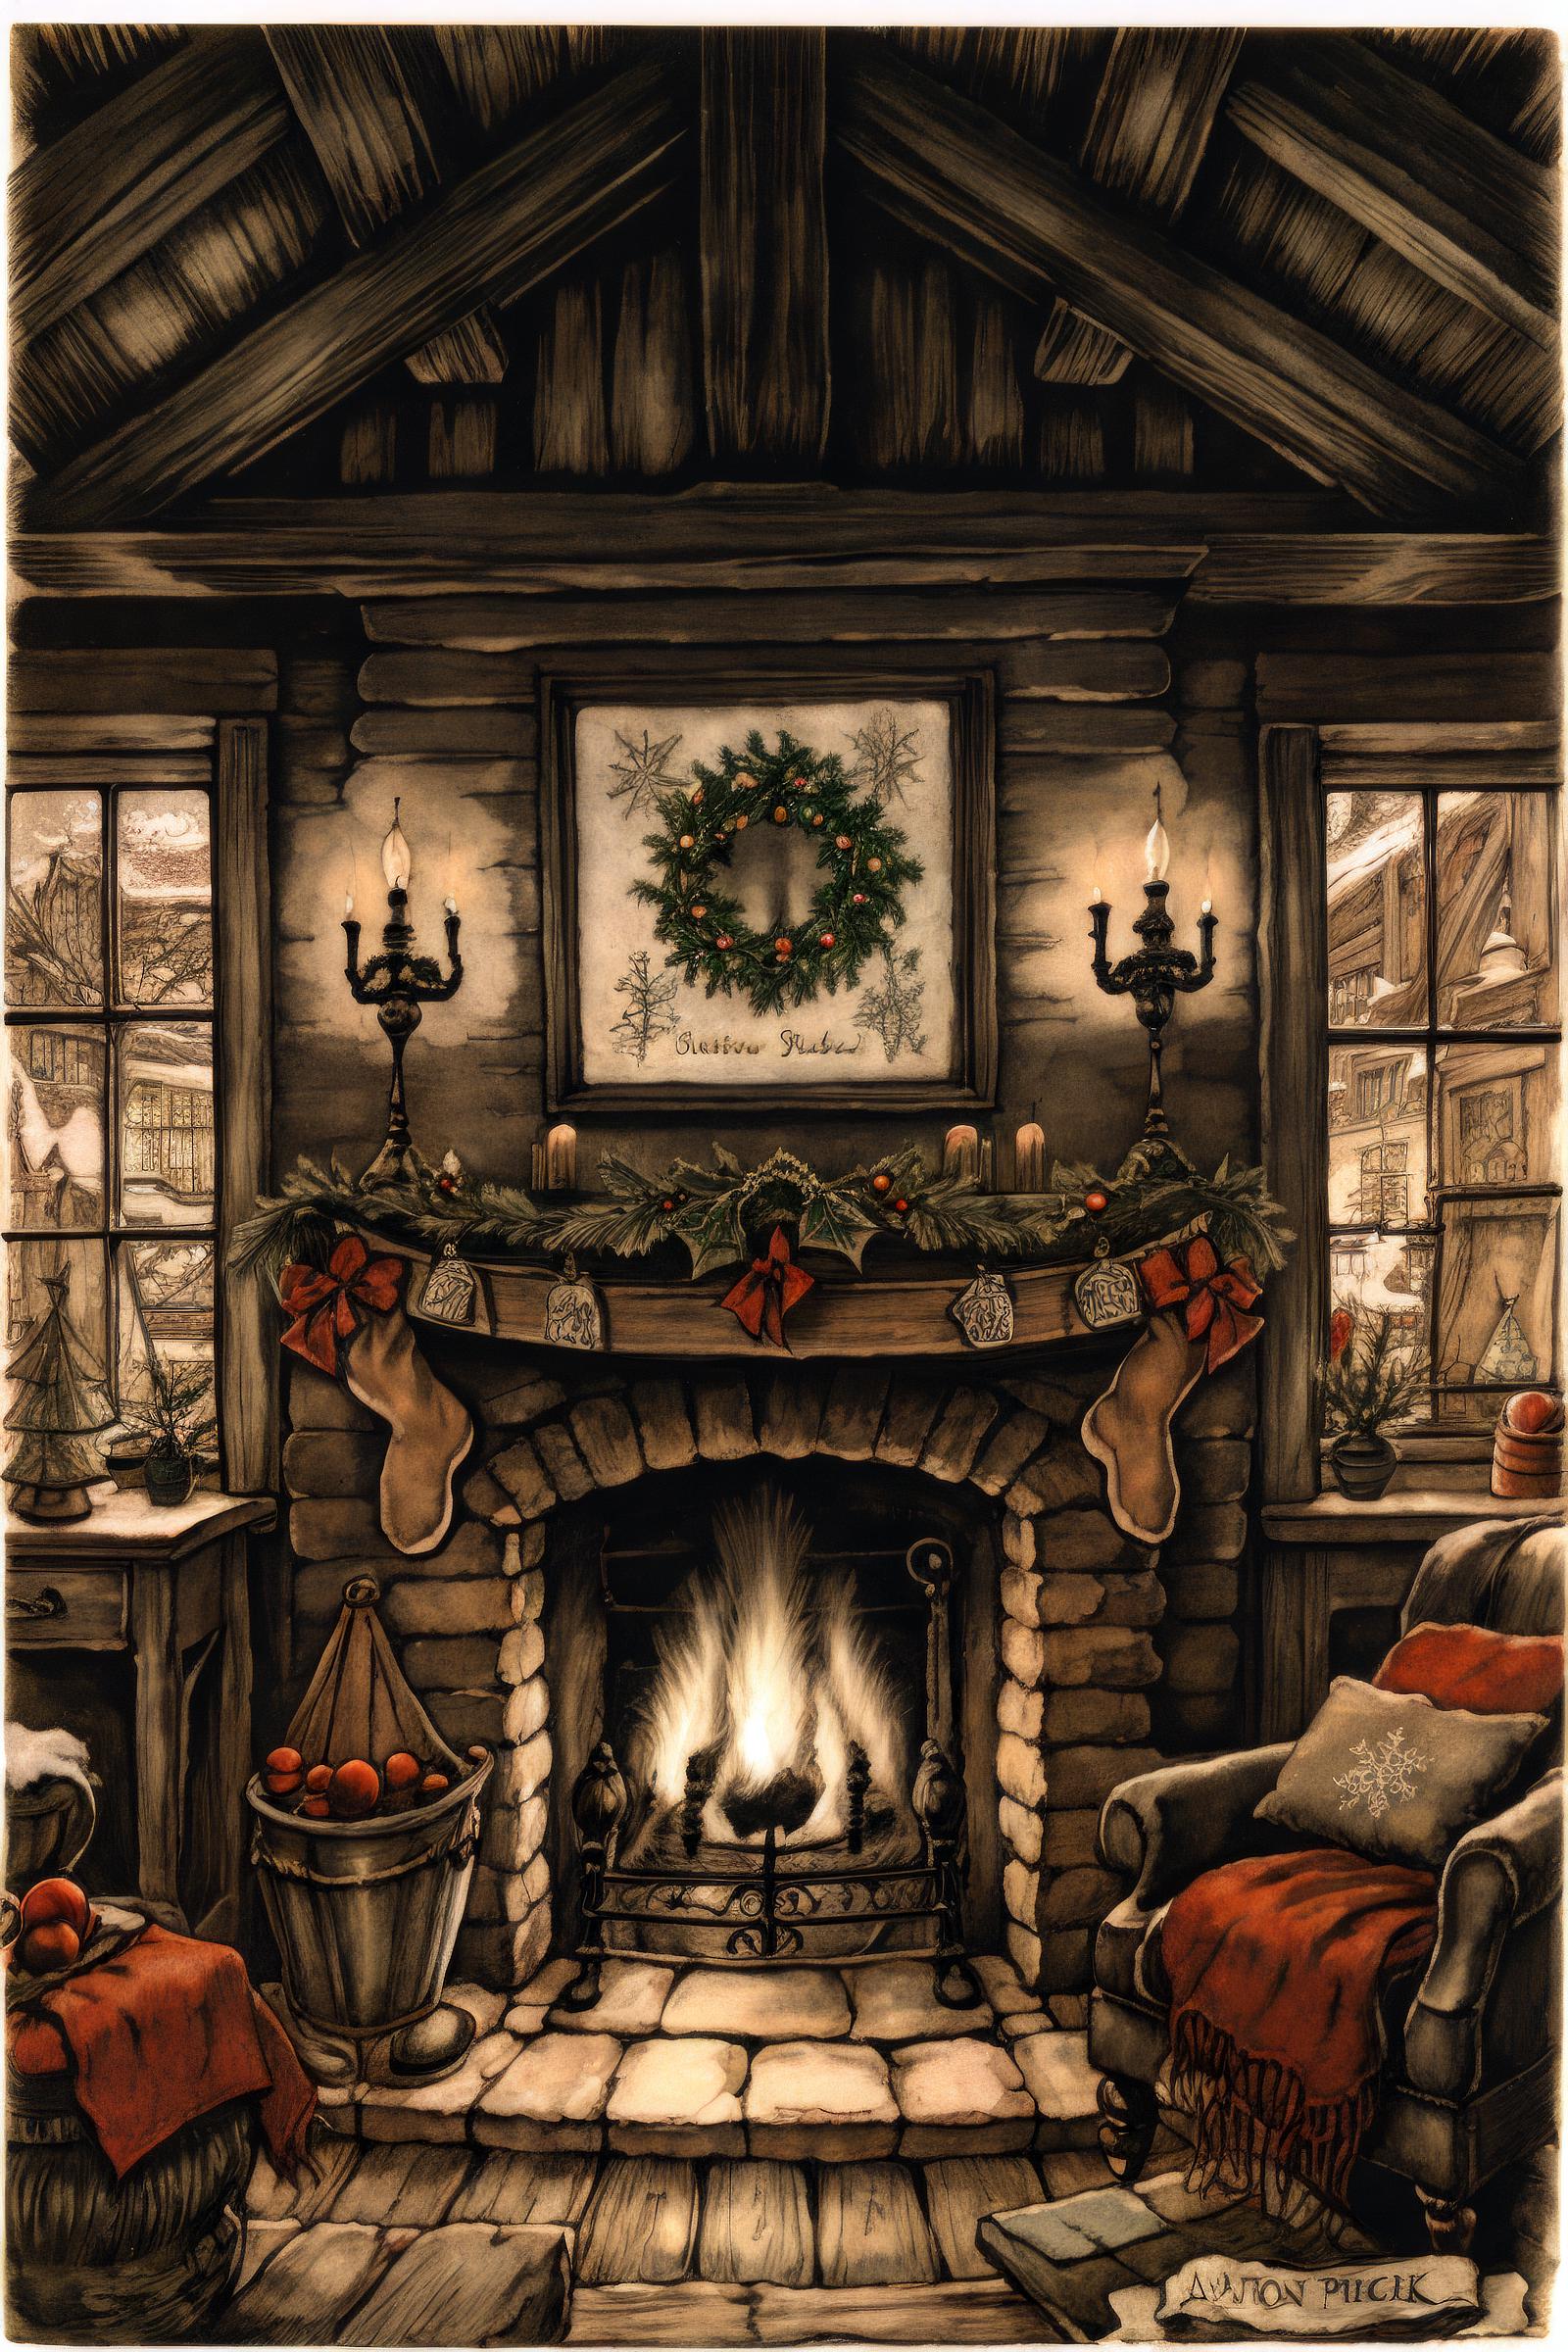 Anton Pieck Style image by Cyberdelia